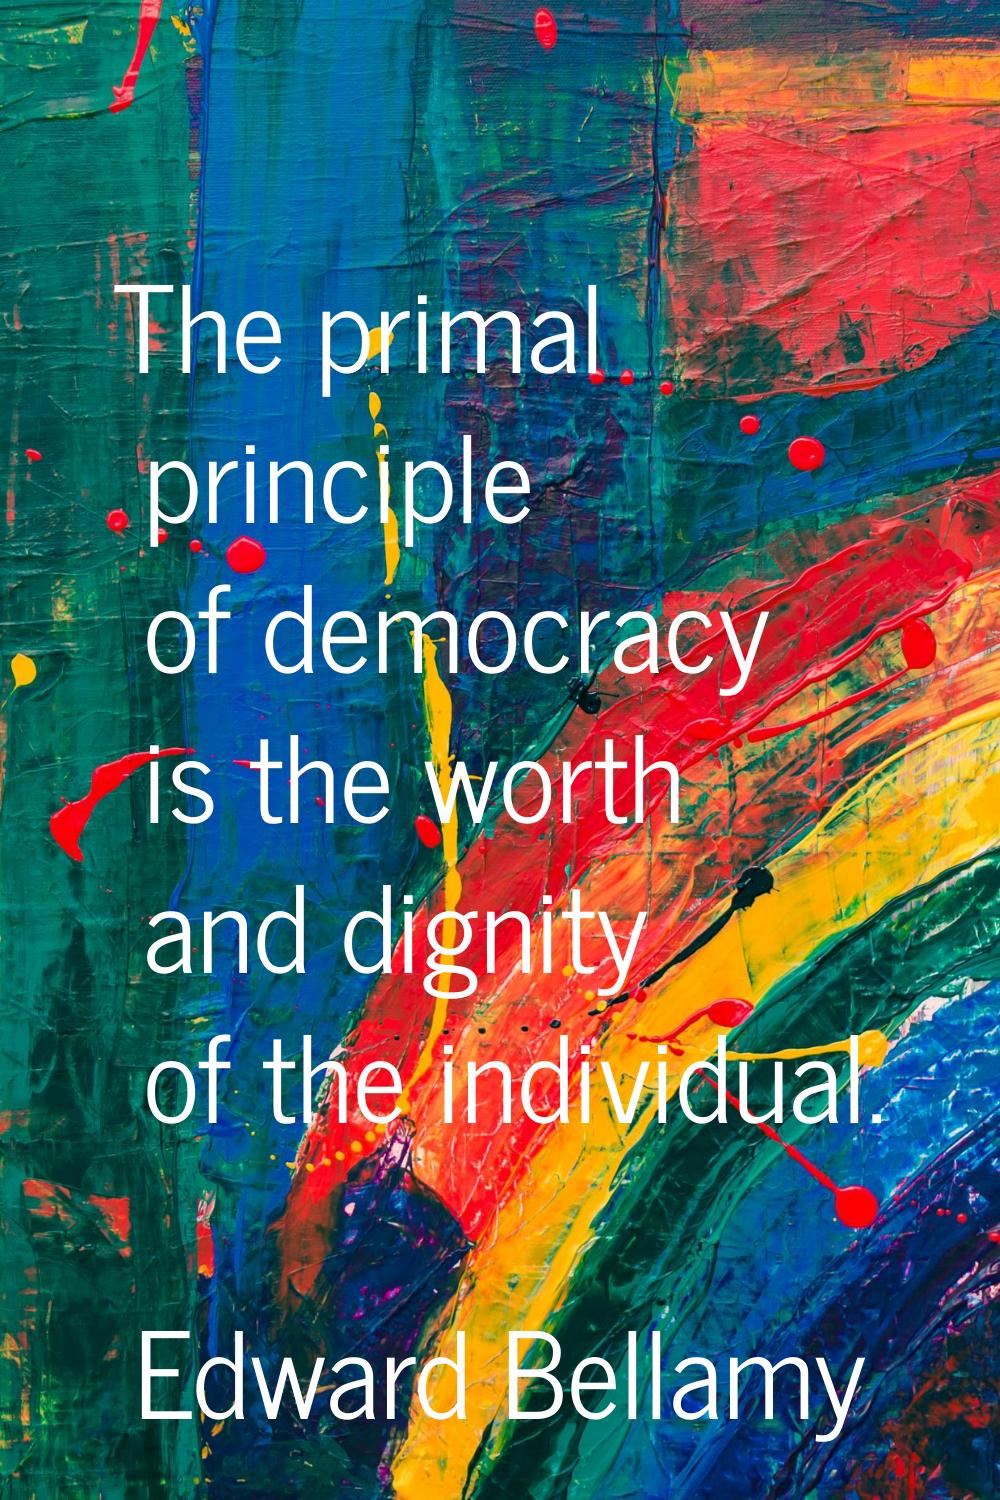 The primal principle of democracy is the worth and dignity of the individual.